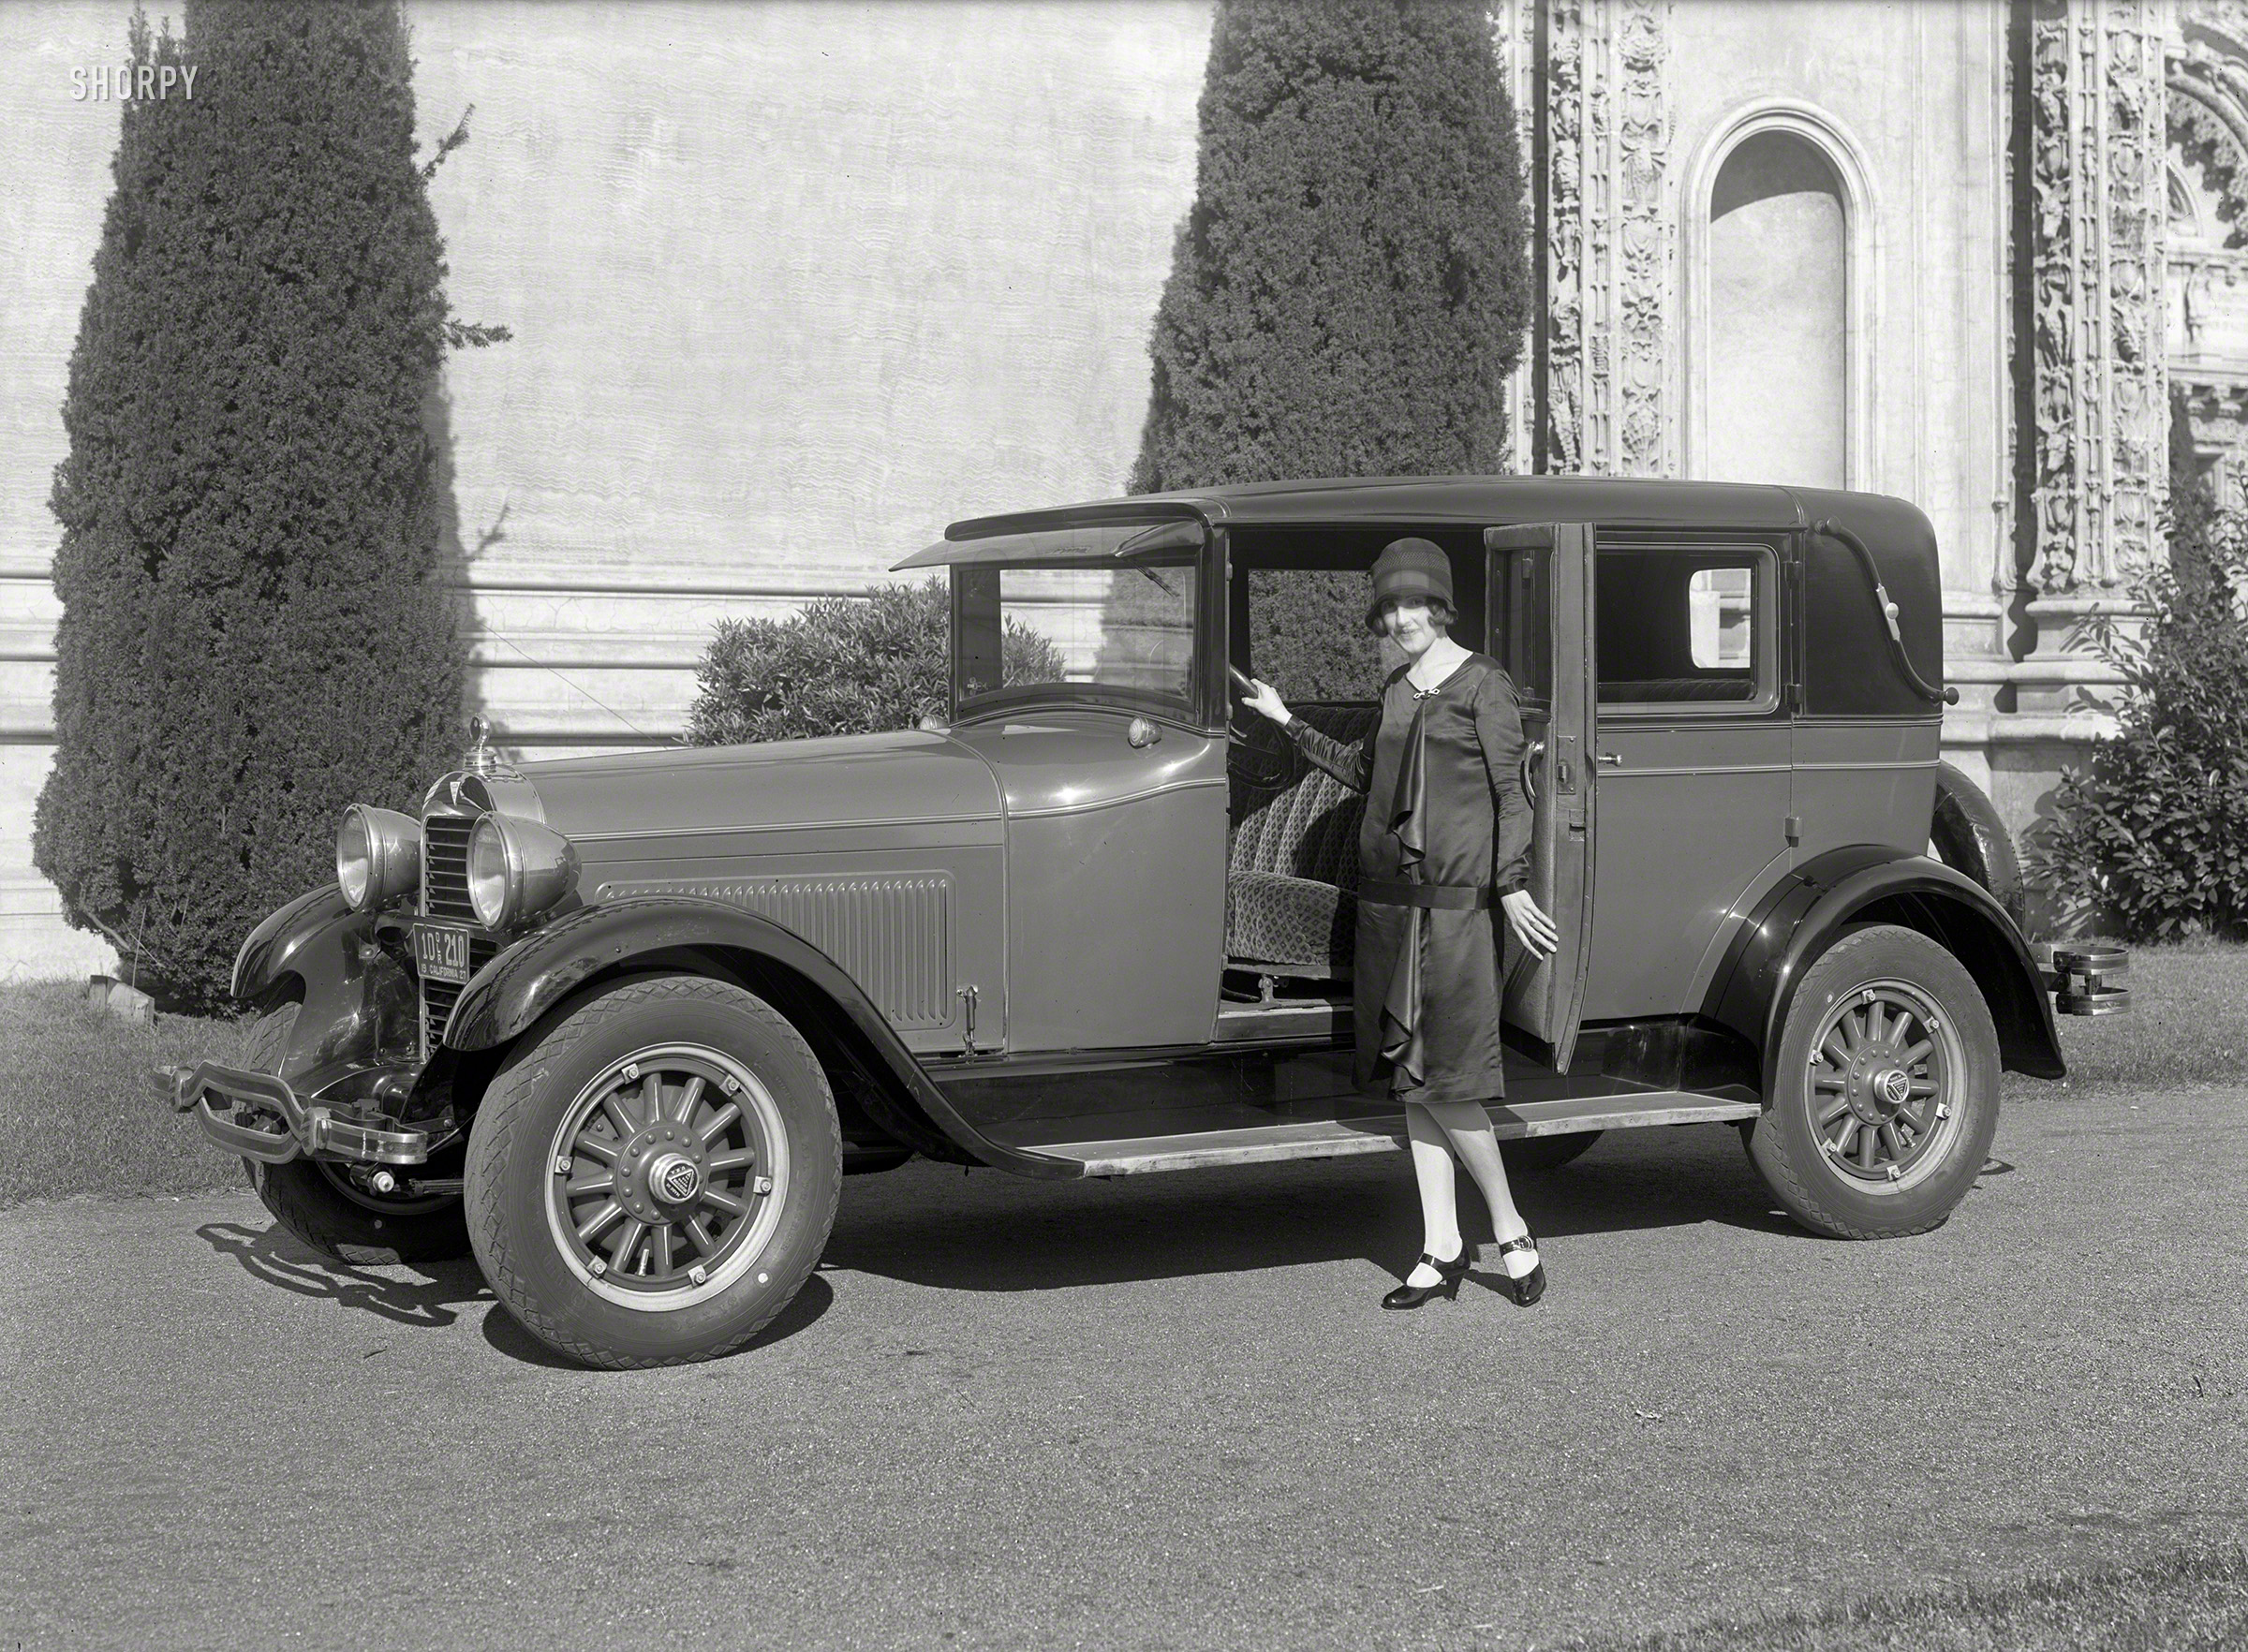 San Francisco, 1927. "Hudson sedan, palace grounds." Car and driver both stylishly upholstered. 5x7 glass negative by Christopher Helin. View full size.